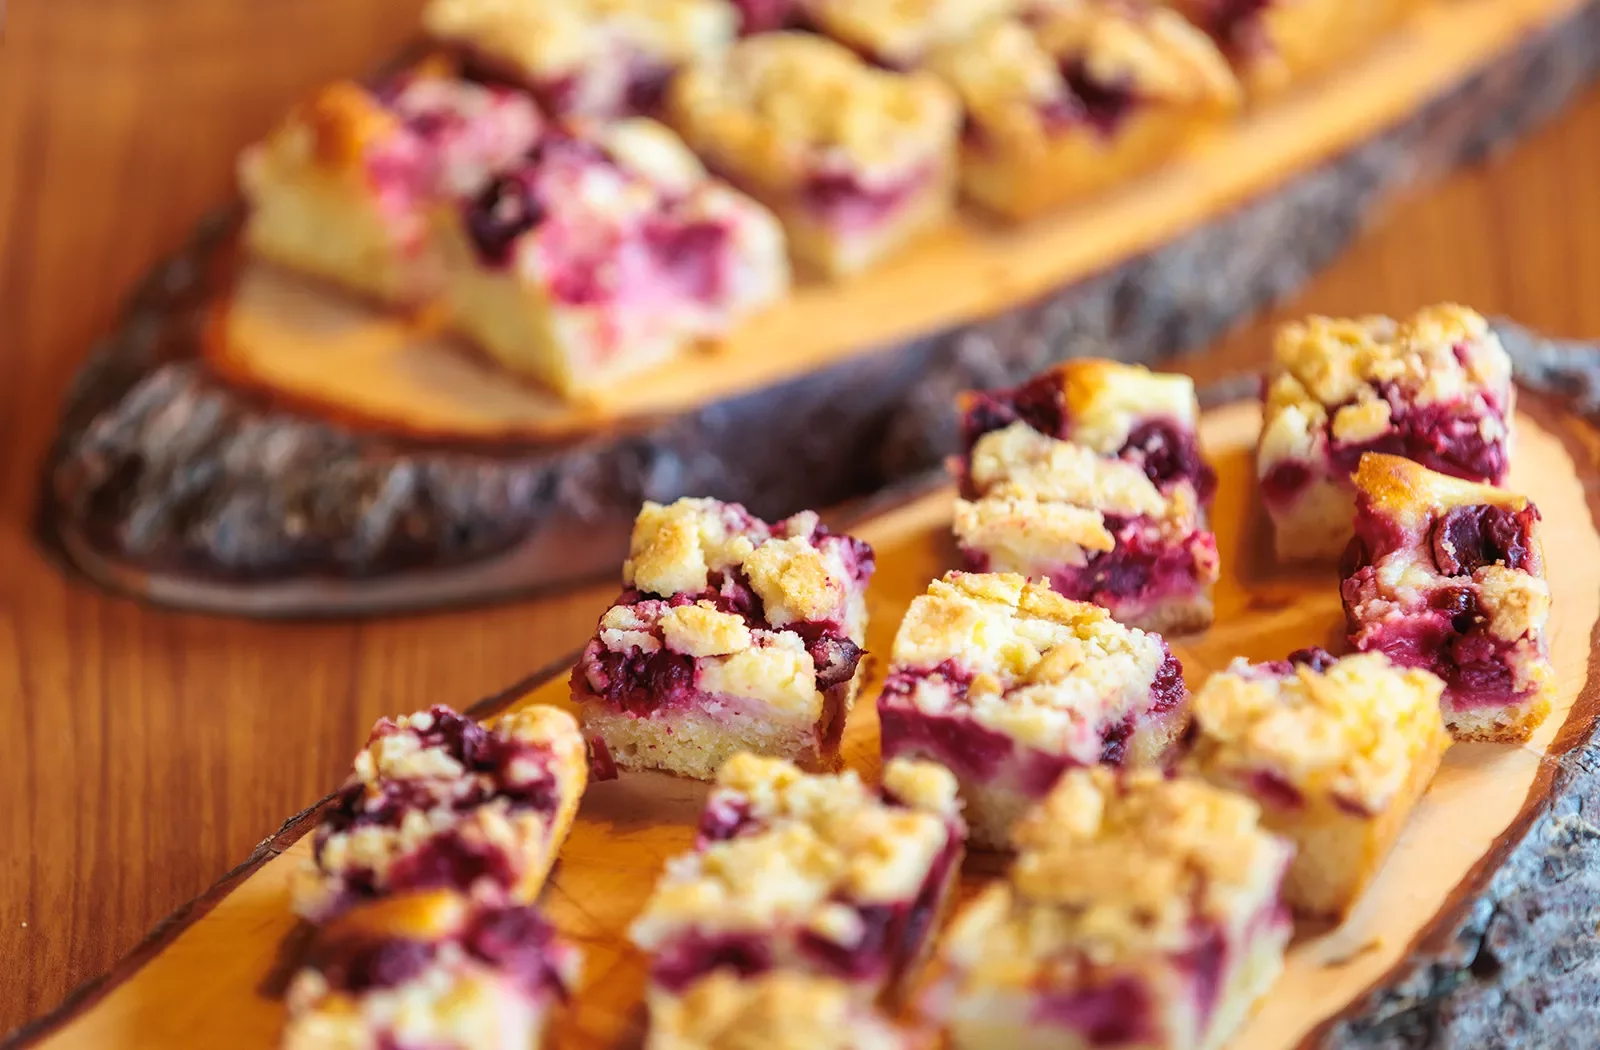 Berry pastries on a wooden plank